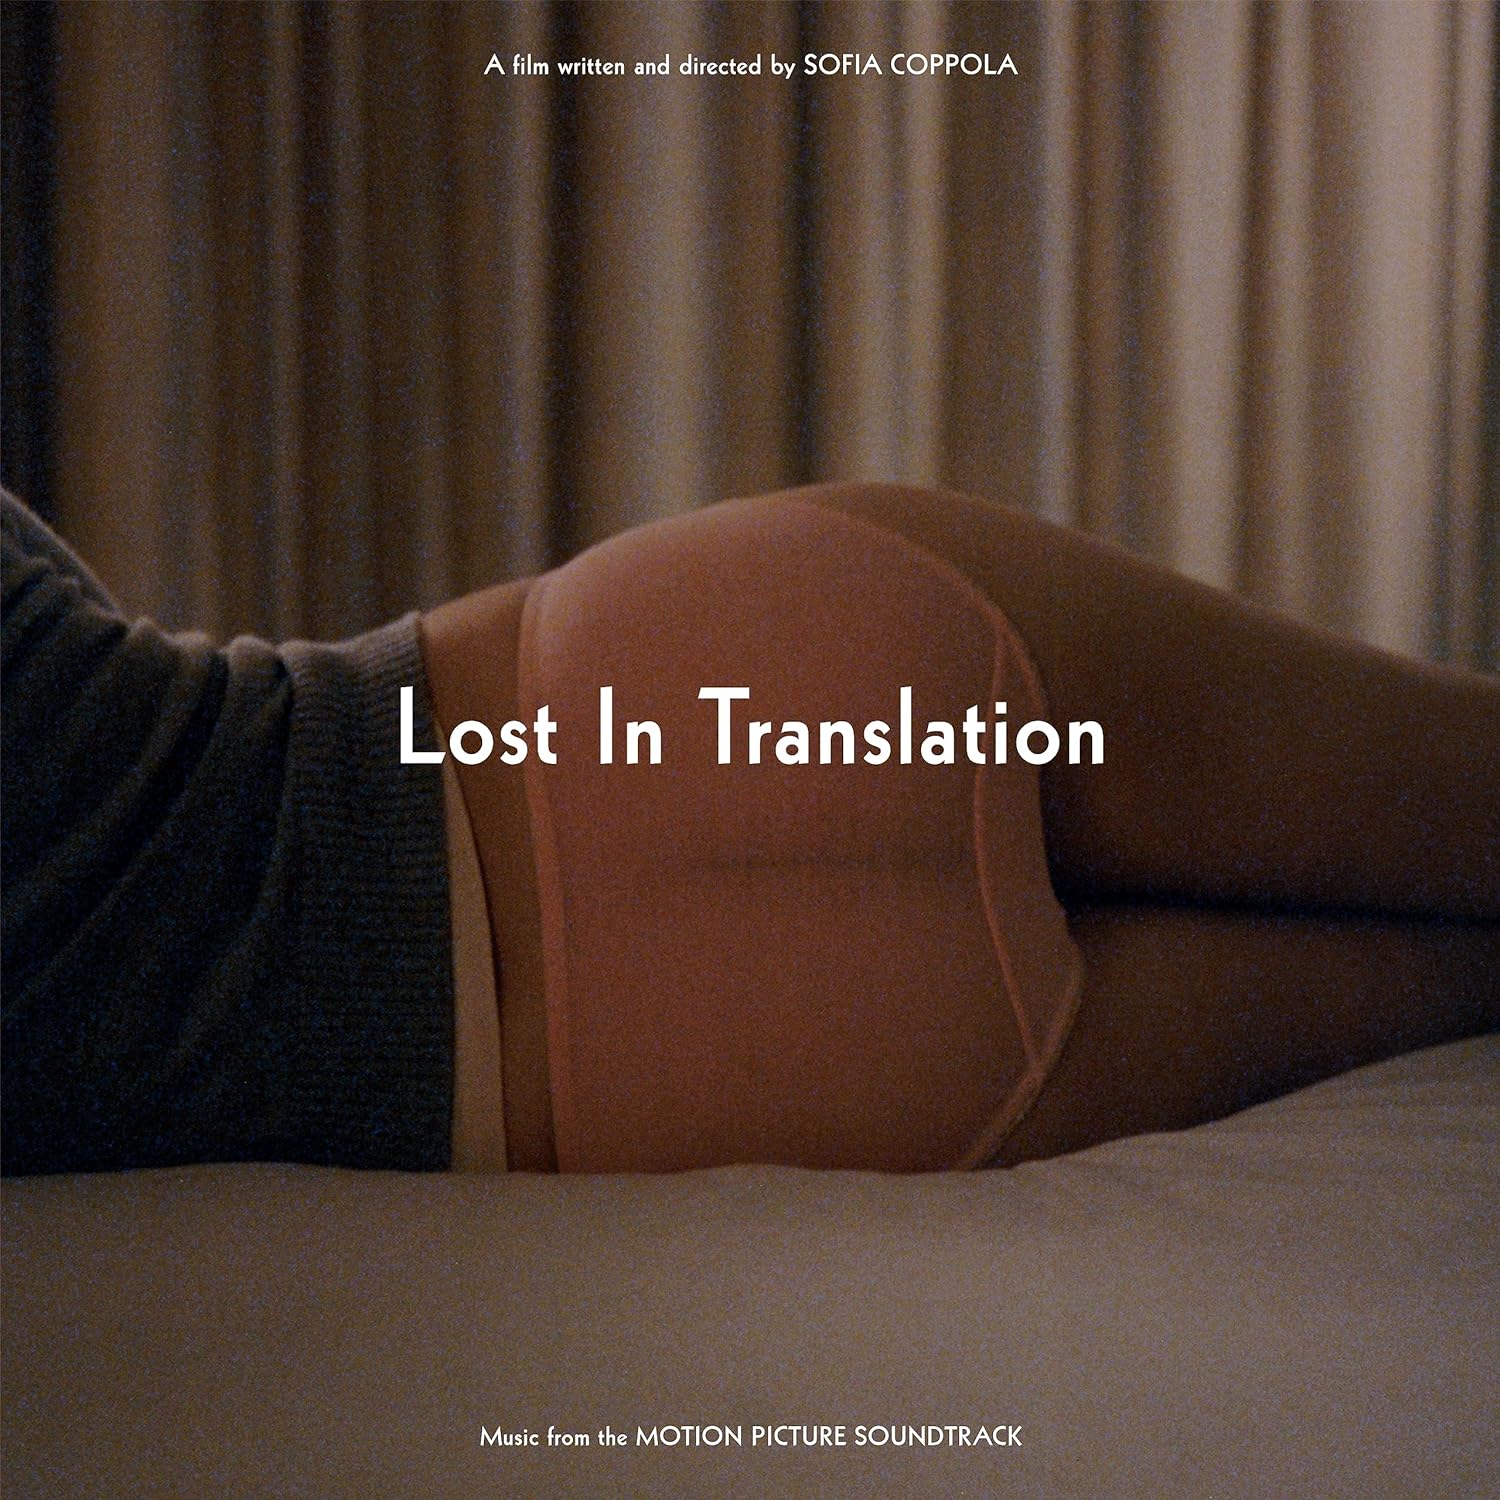 Lost In Translation (Music From The Motion Picture Soundtrack) (Vinyl LP)